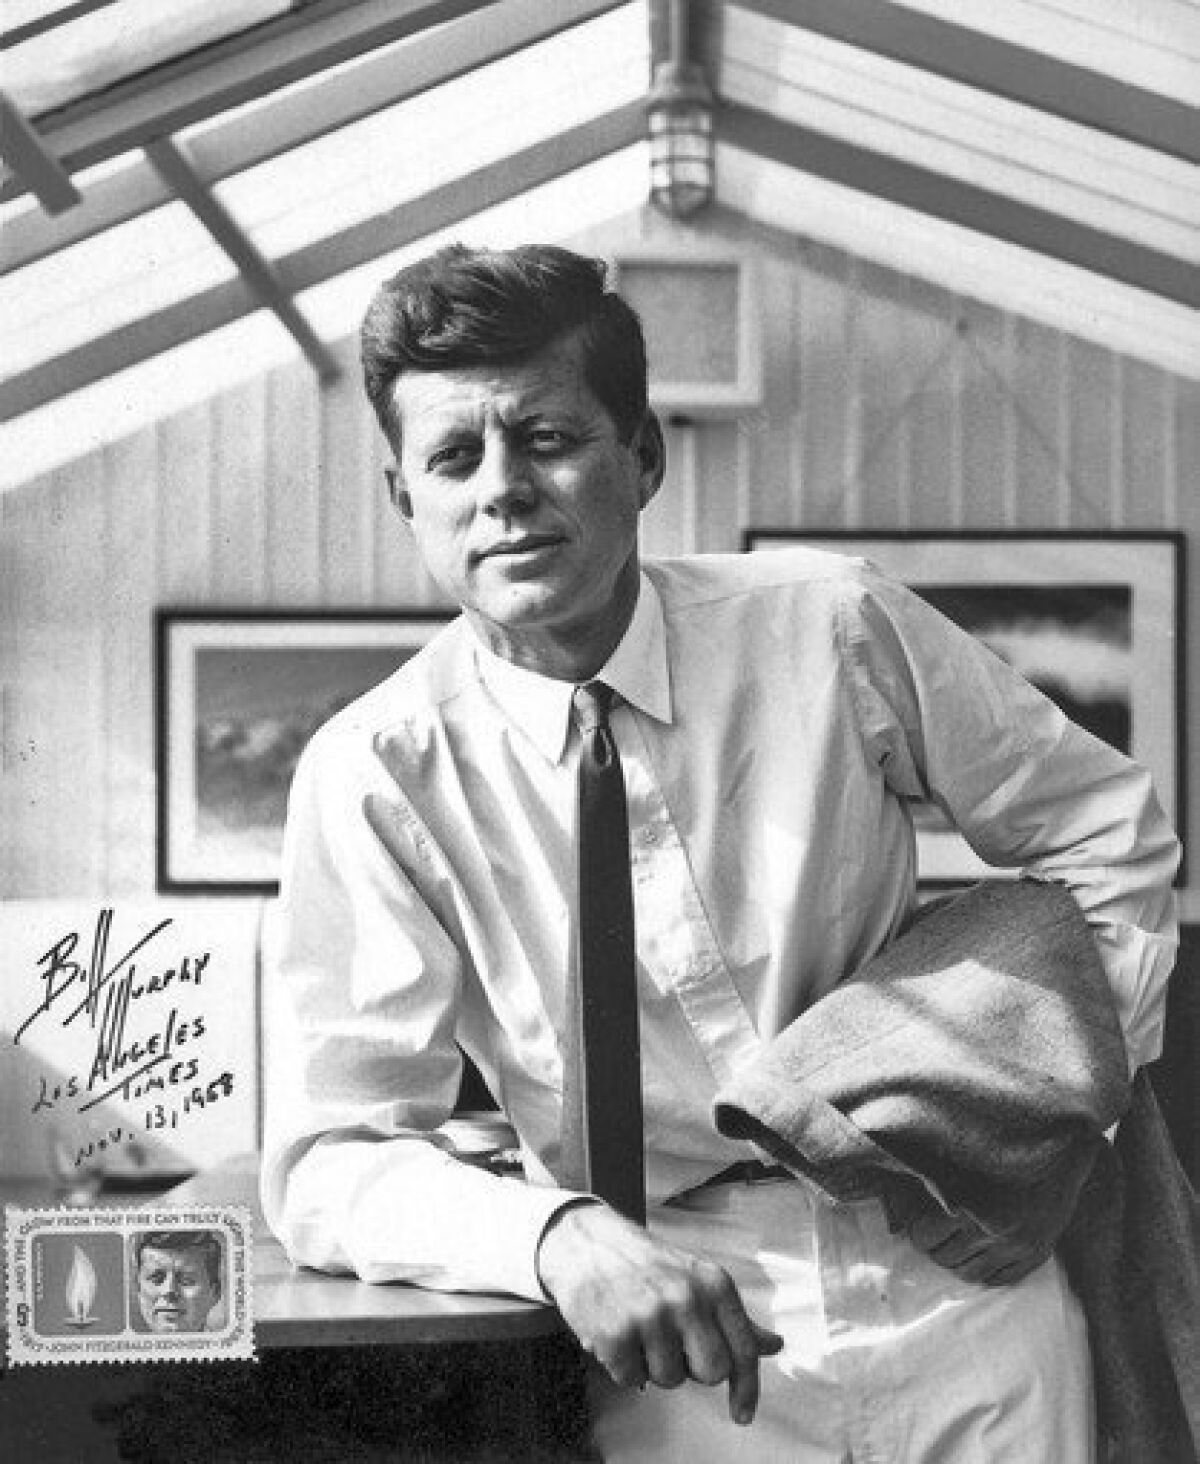 This portrait of then-Sen. John F. Kennedy was taken in 1958 at his sister's Santa Monica home and was later used in 1964 in the first stamp commemorating him after his assassination. William S. Murphy, who took the photo, autographed the print and placed one of the stamps in the lower left corner.